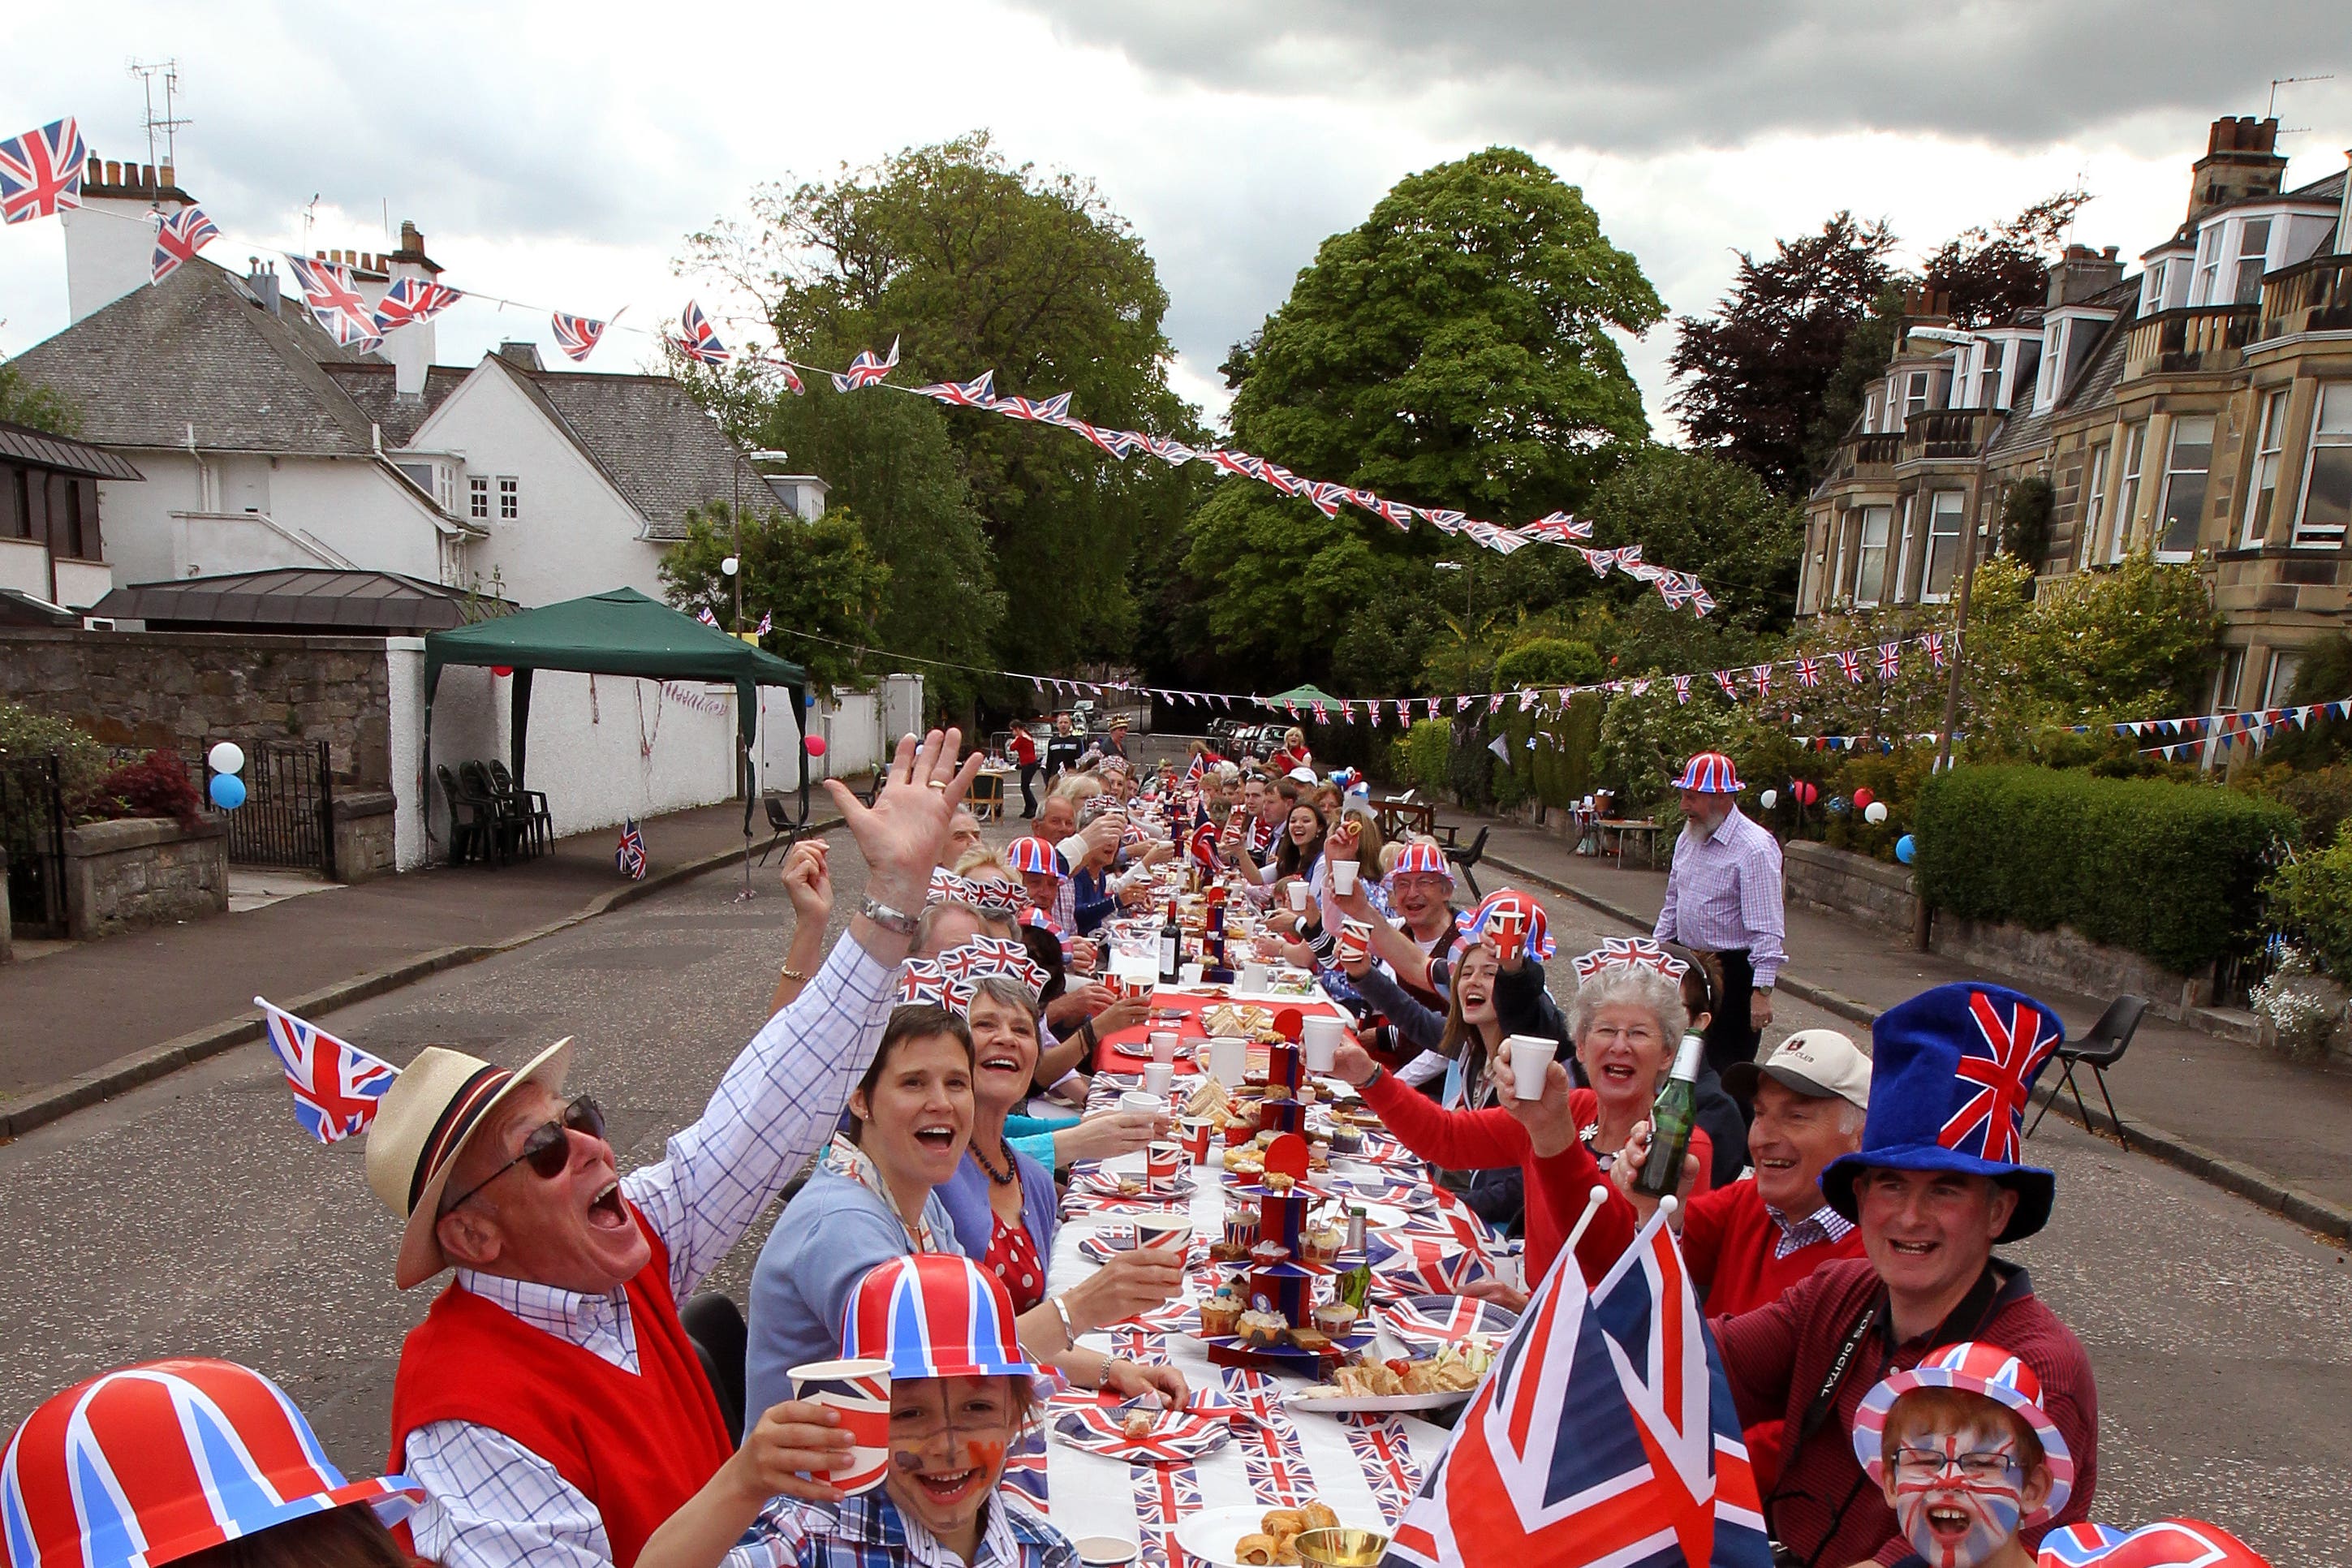 Residents of Murrayfield Drive in Edinburgh sit down to a Jubilee street party in 2012 (Andrew Milligan/PA)